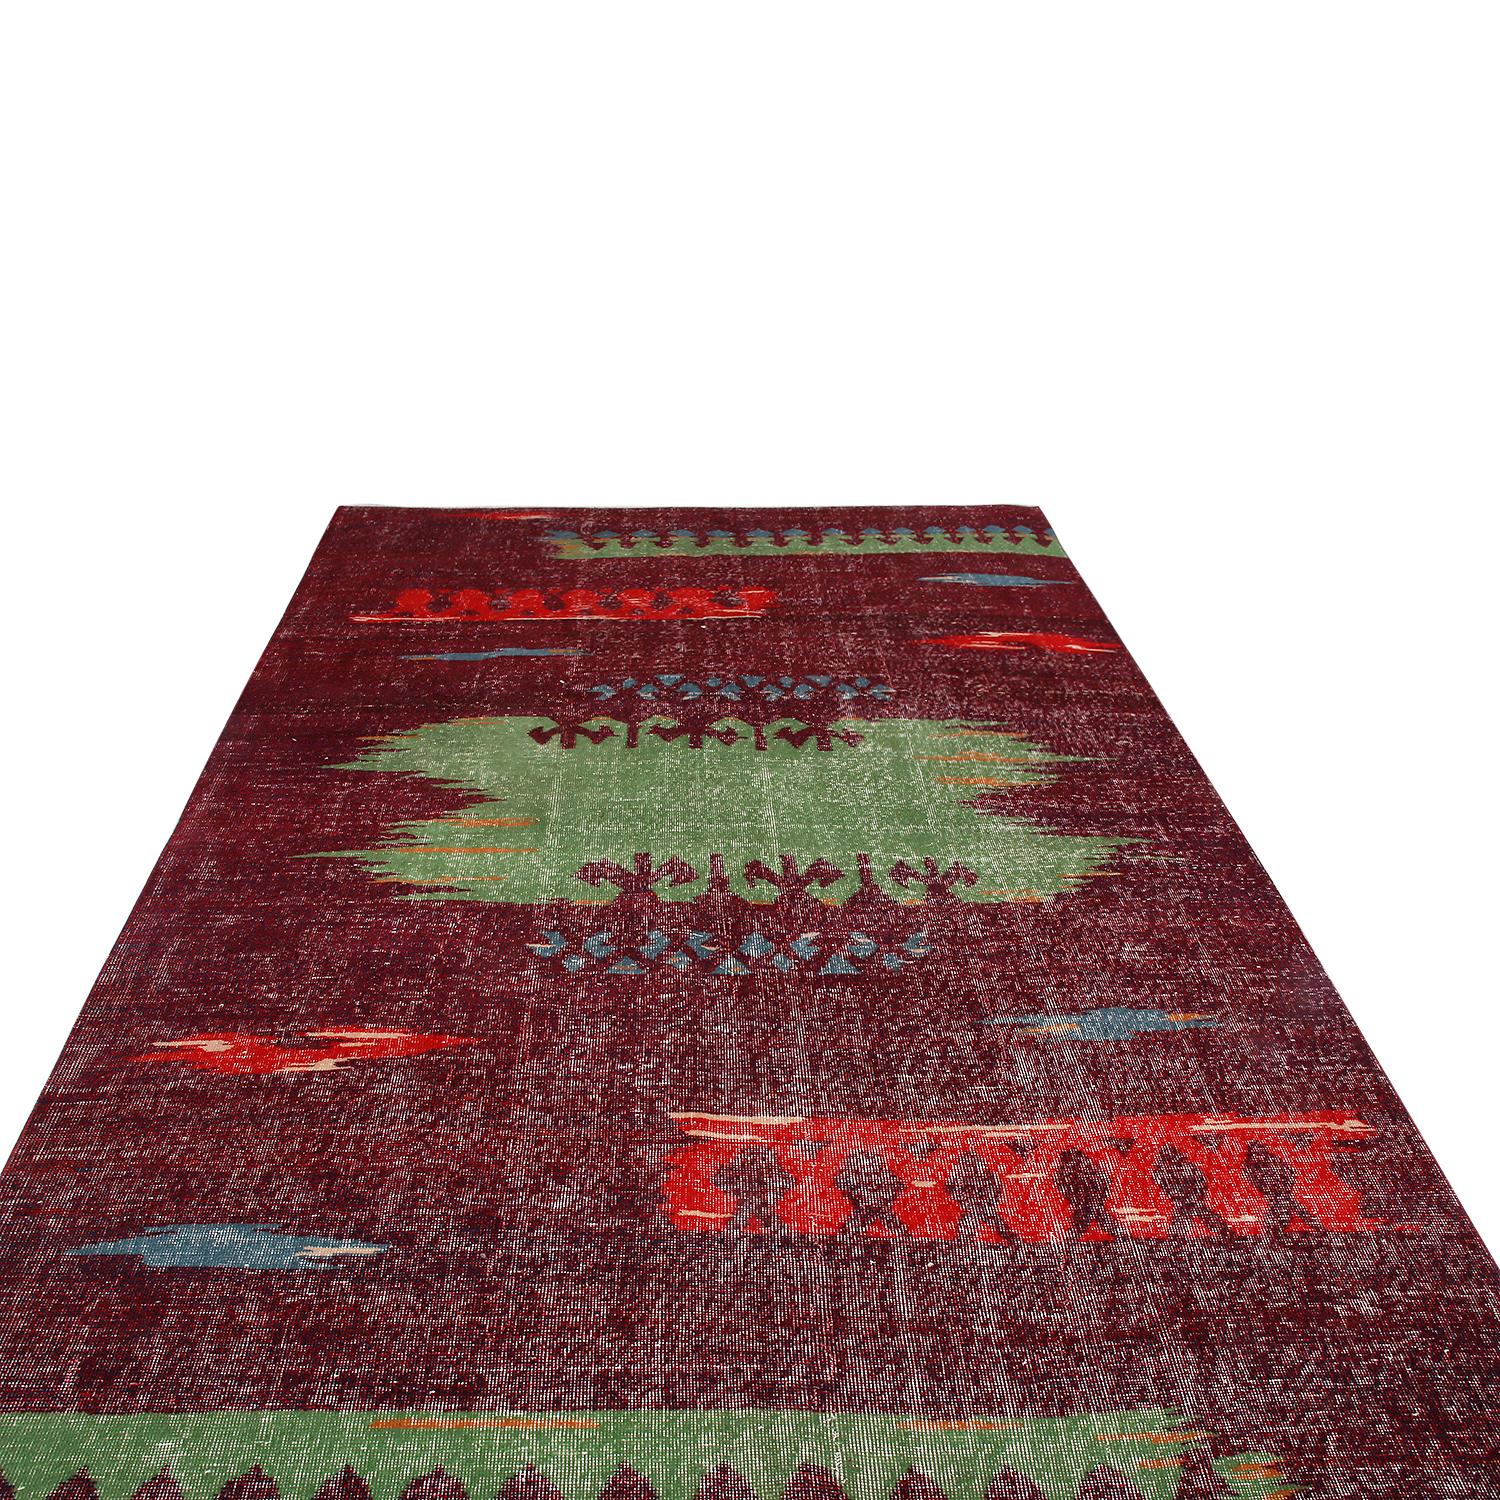 Hand knotted in Turkey originating between 1960-1970, this vintage midcentury runner joins Rug & Kilim’s midcentury Pasha collection celebrating Turkish icon Zeki Müren with Josh’s hand picked favorites from this period. A much more